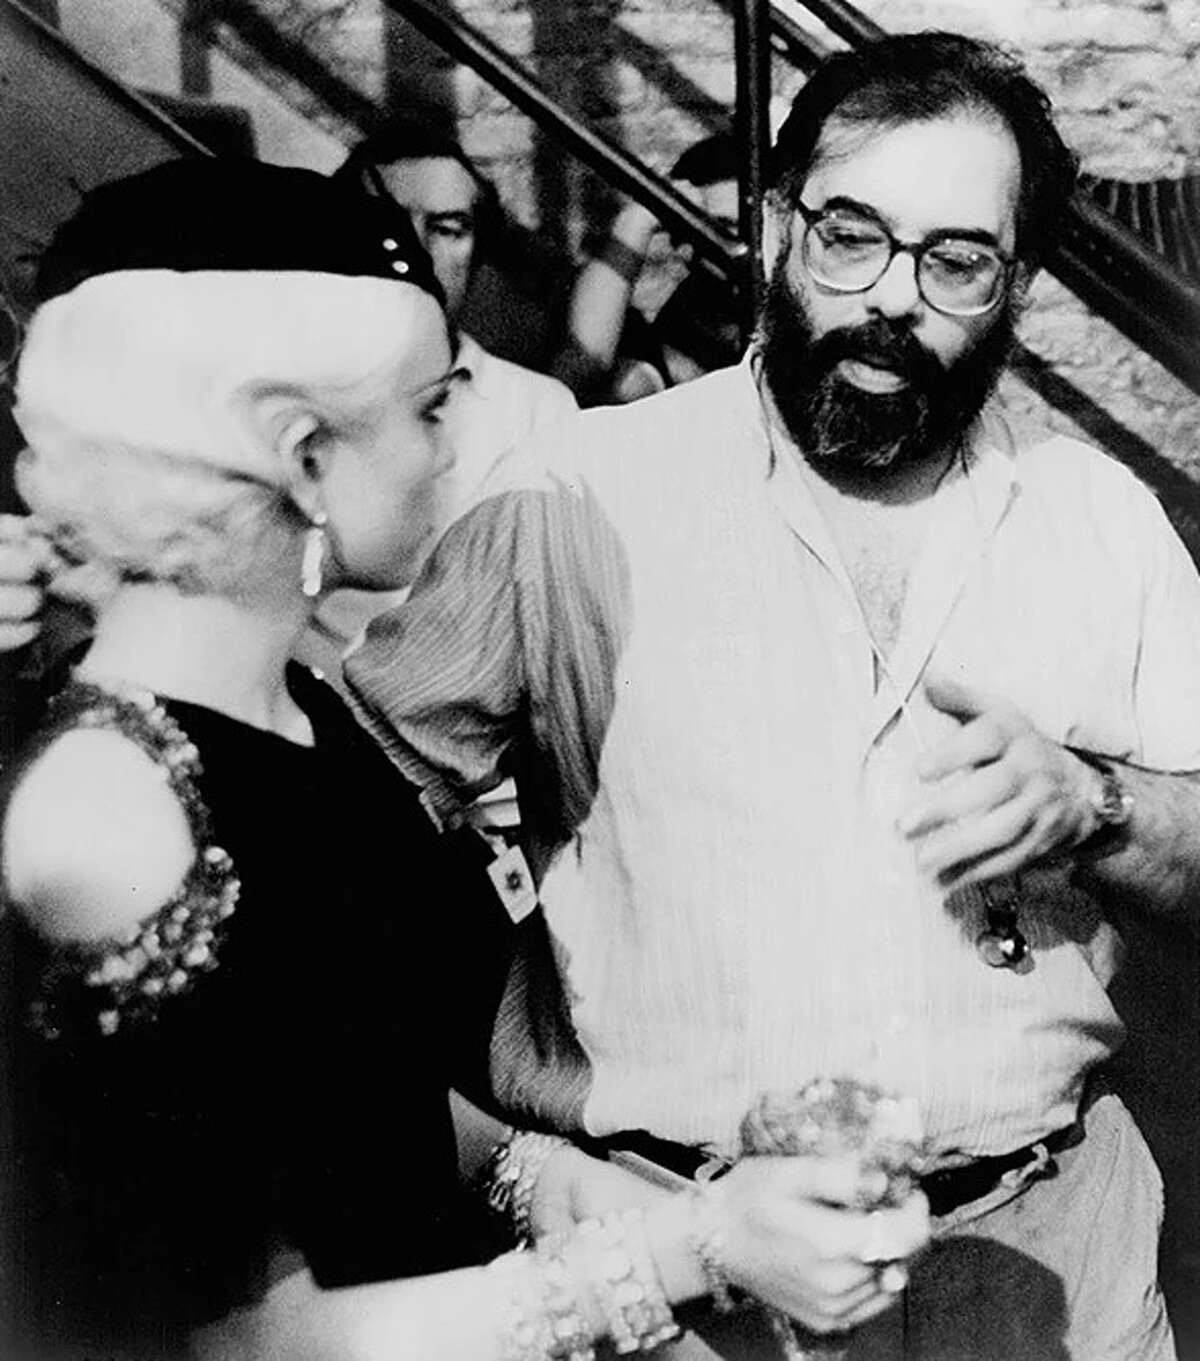 Actor Diane Lane and director Francis Ford Coppola discuss a scene during filming of "The Cotton Club."